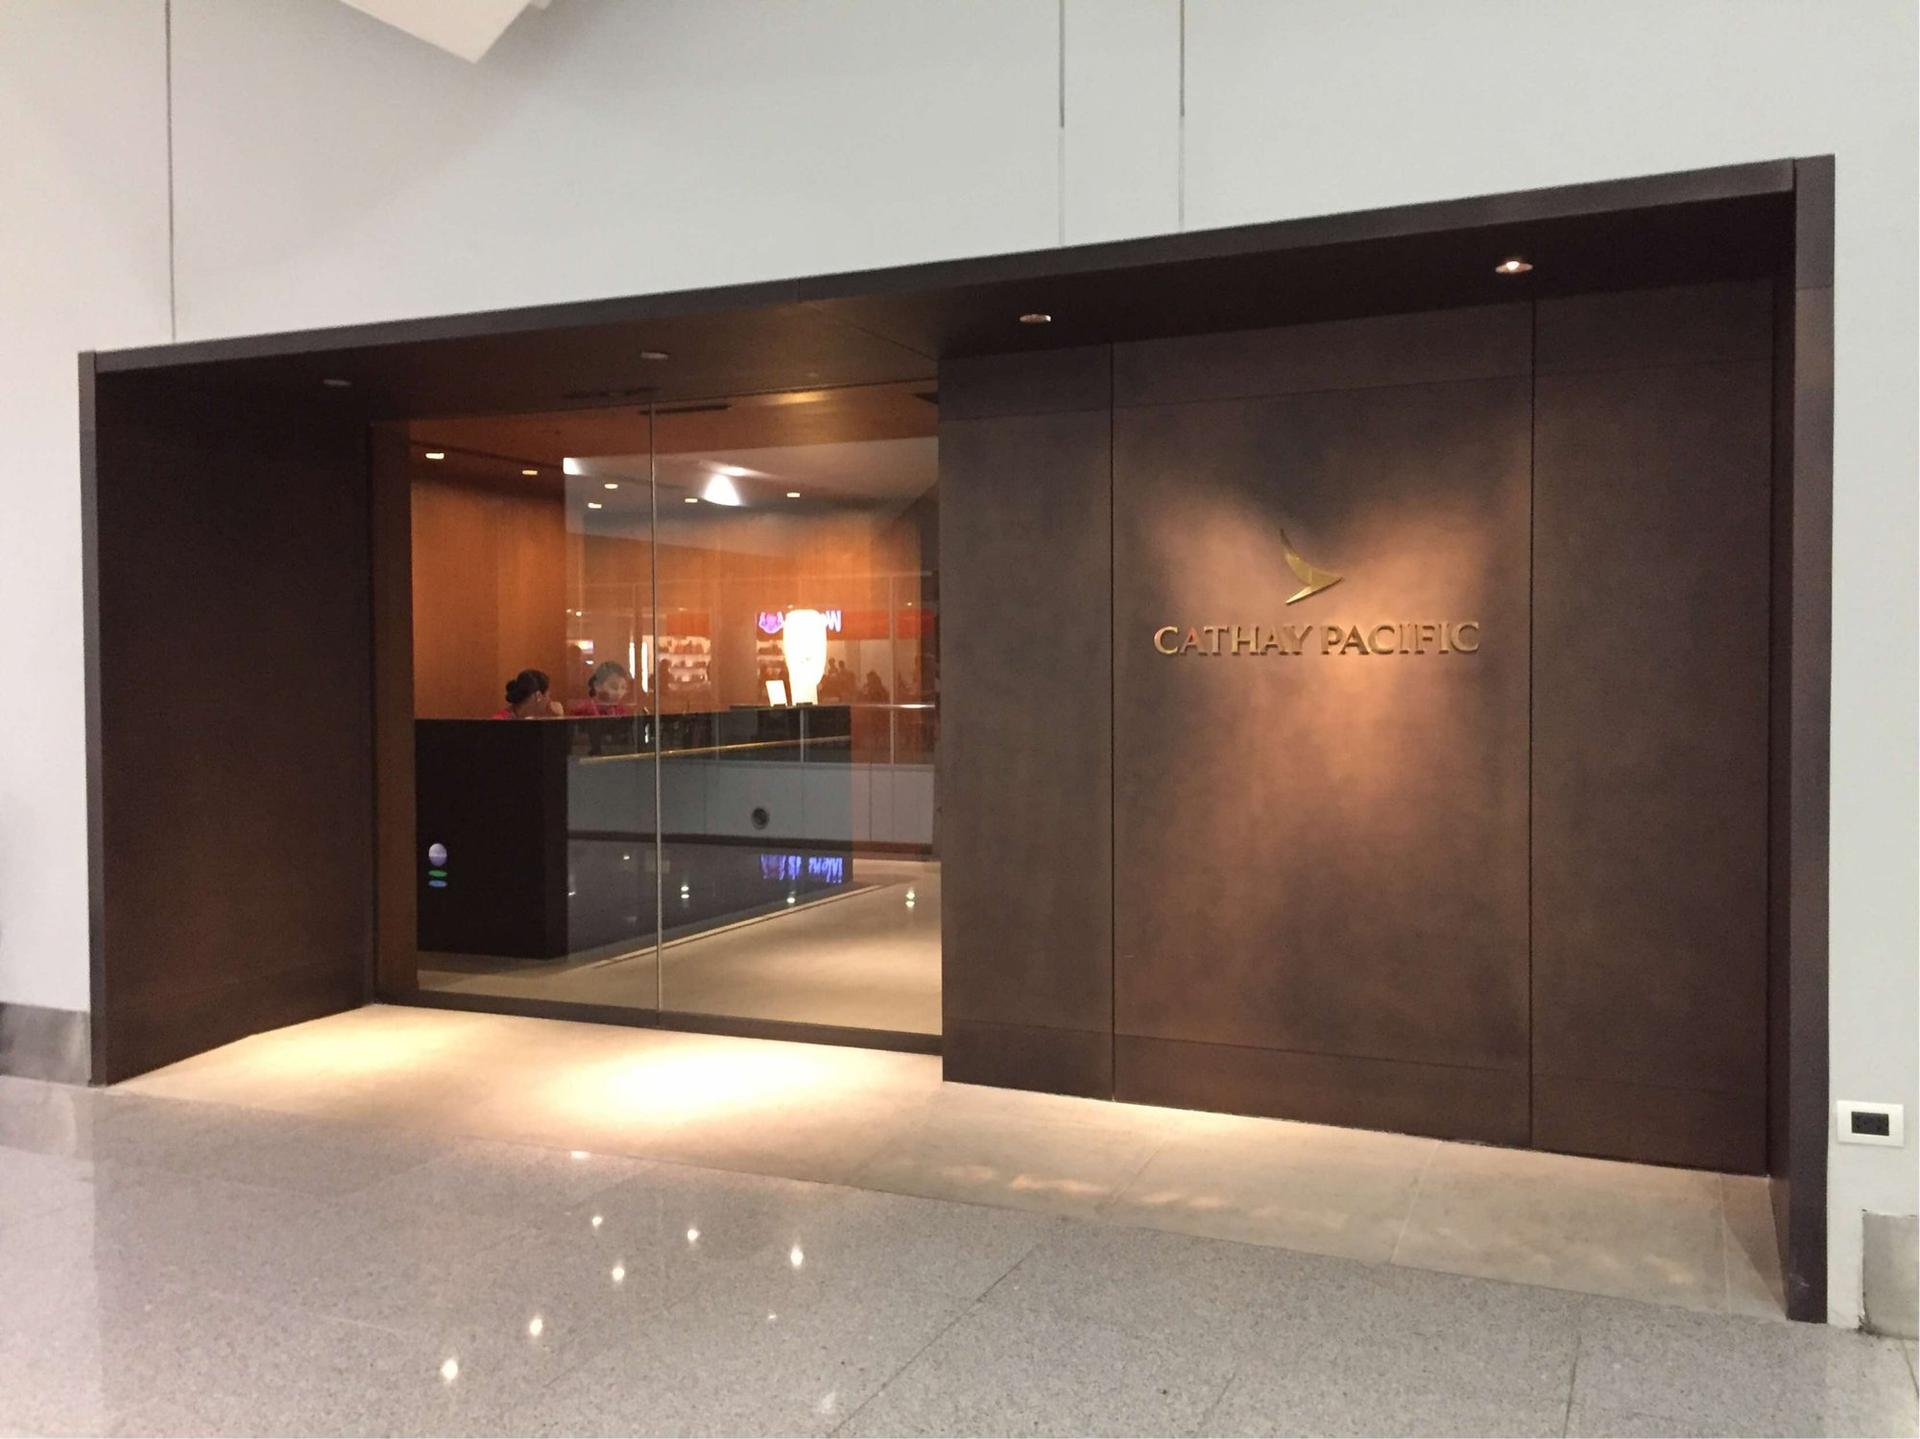 Cathay Pacific First and Business Class Lounge image 15 of 19